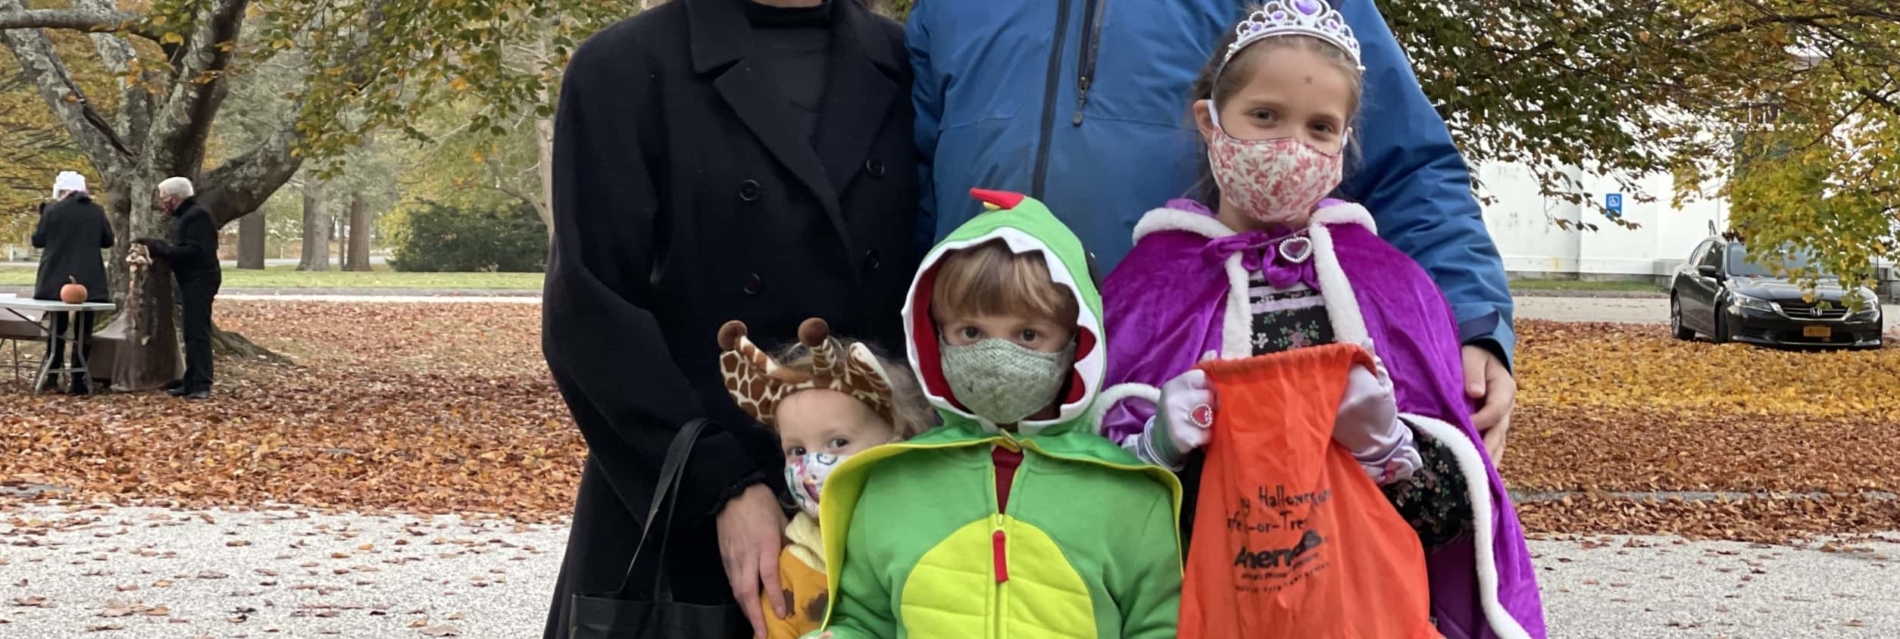 A family of five dressed up for Halloween